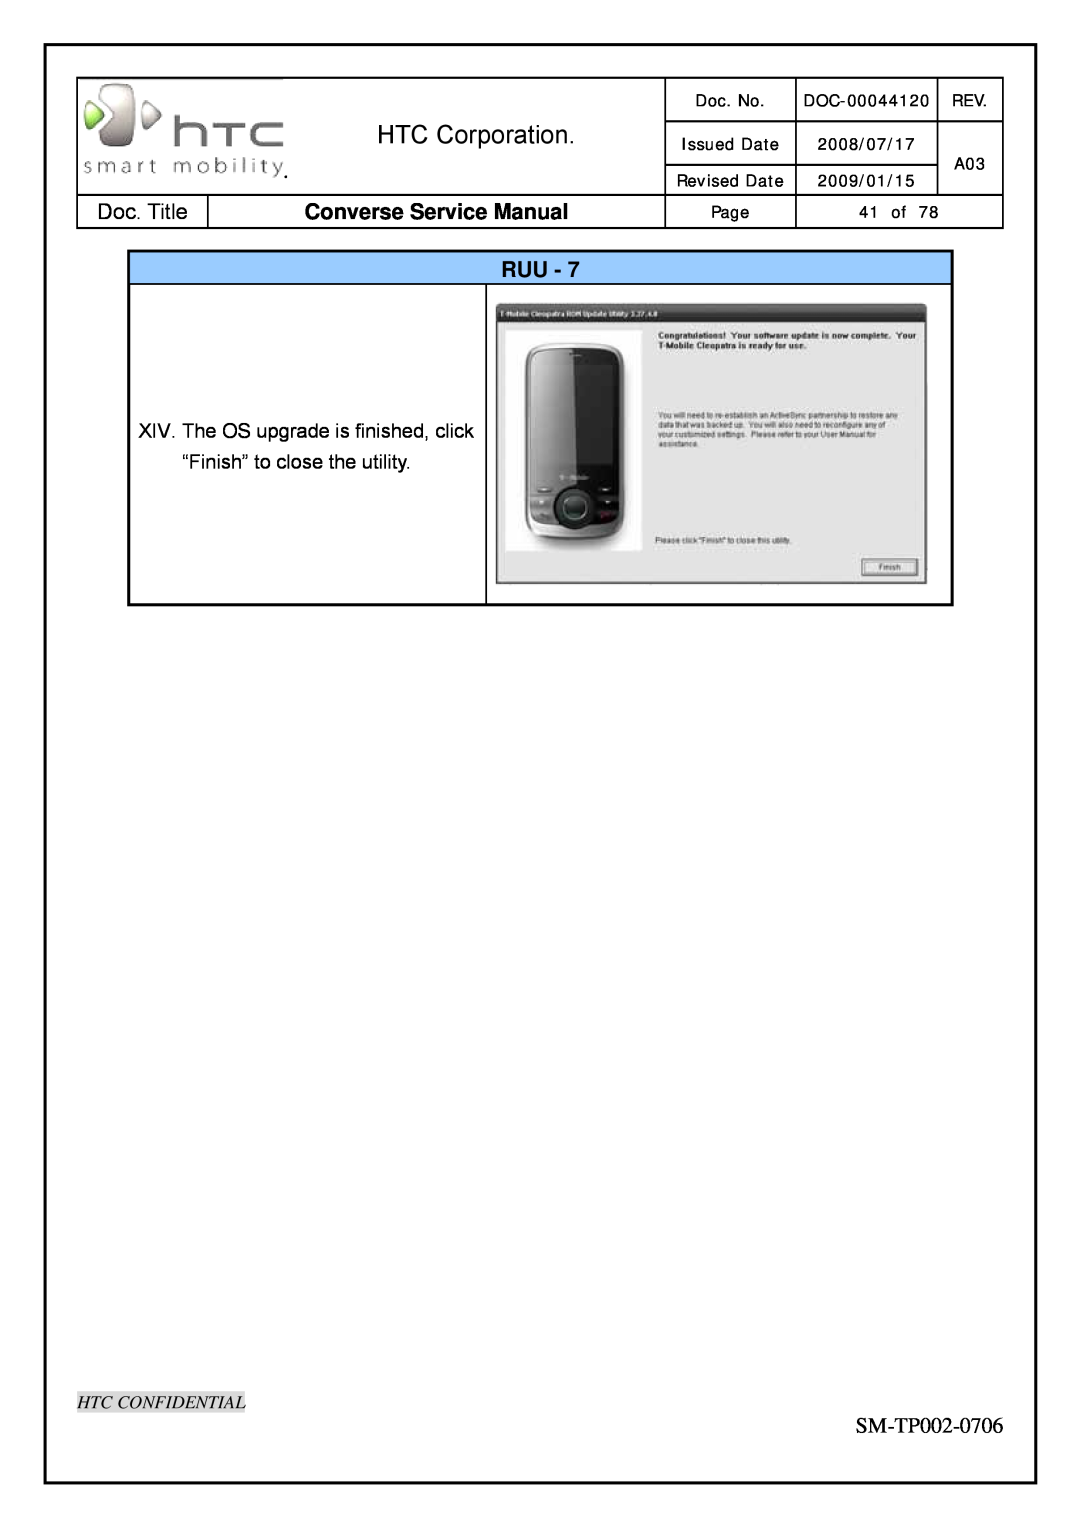 HTC SM-TP002-0706 HTC Corporation, Converse Service Manual, Htc Confidential, Doc. No, DOC-00044120, 41 of, Issued Date 